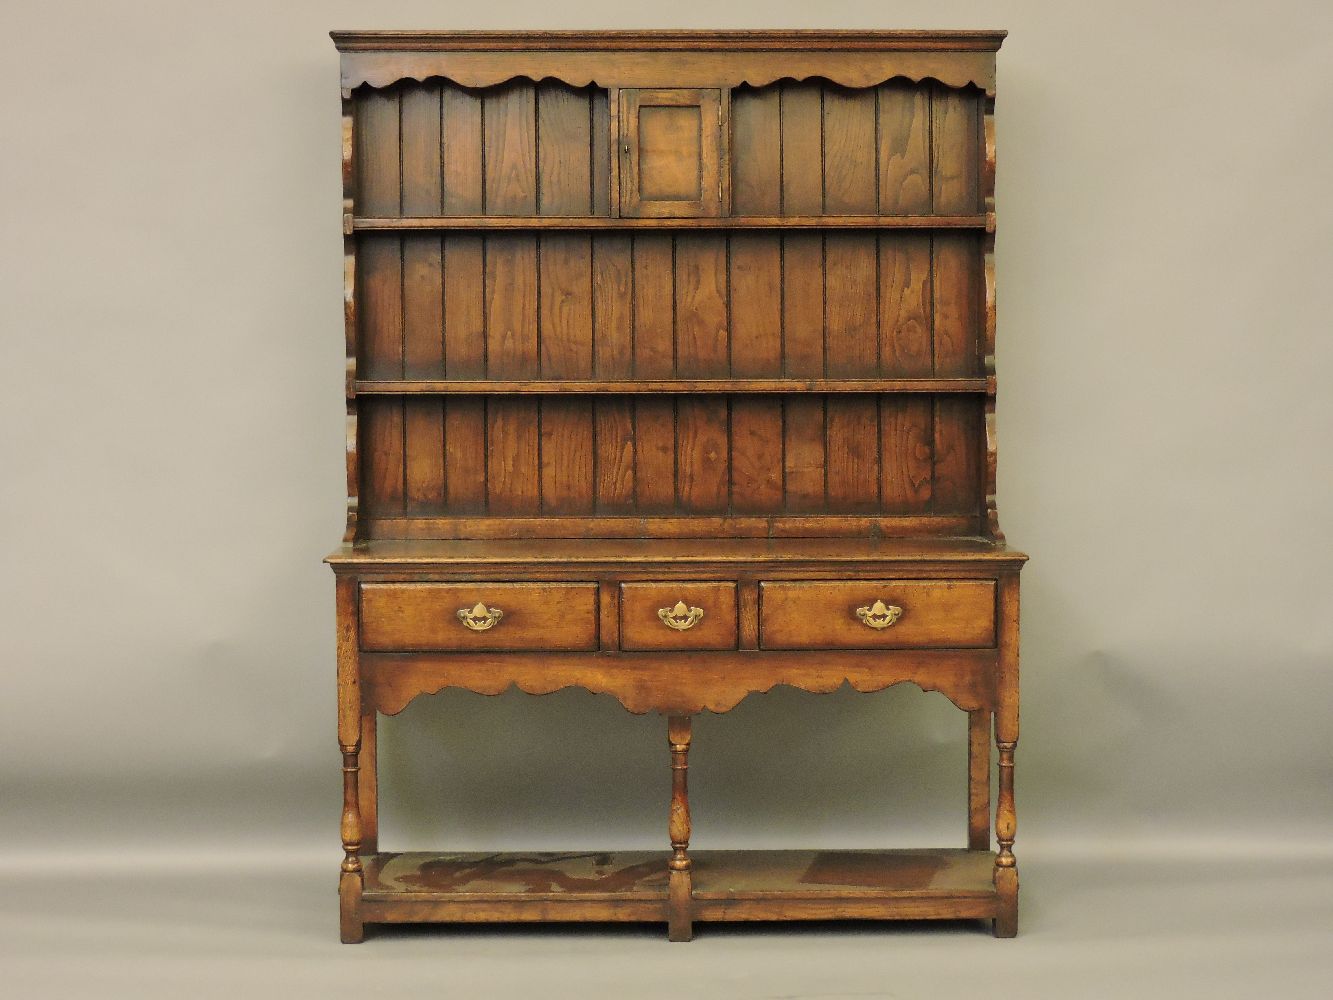 A reproduction George III style oak dresser, with rack over, 135 x 44 x 182cm